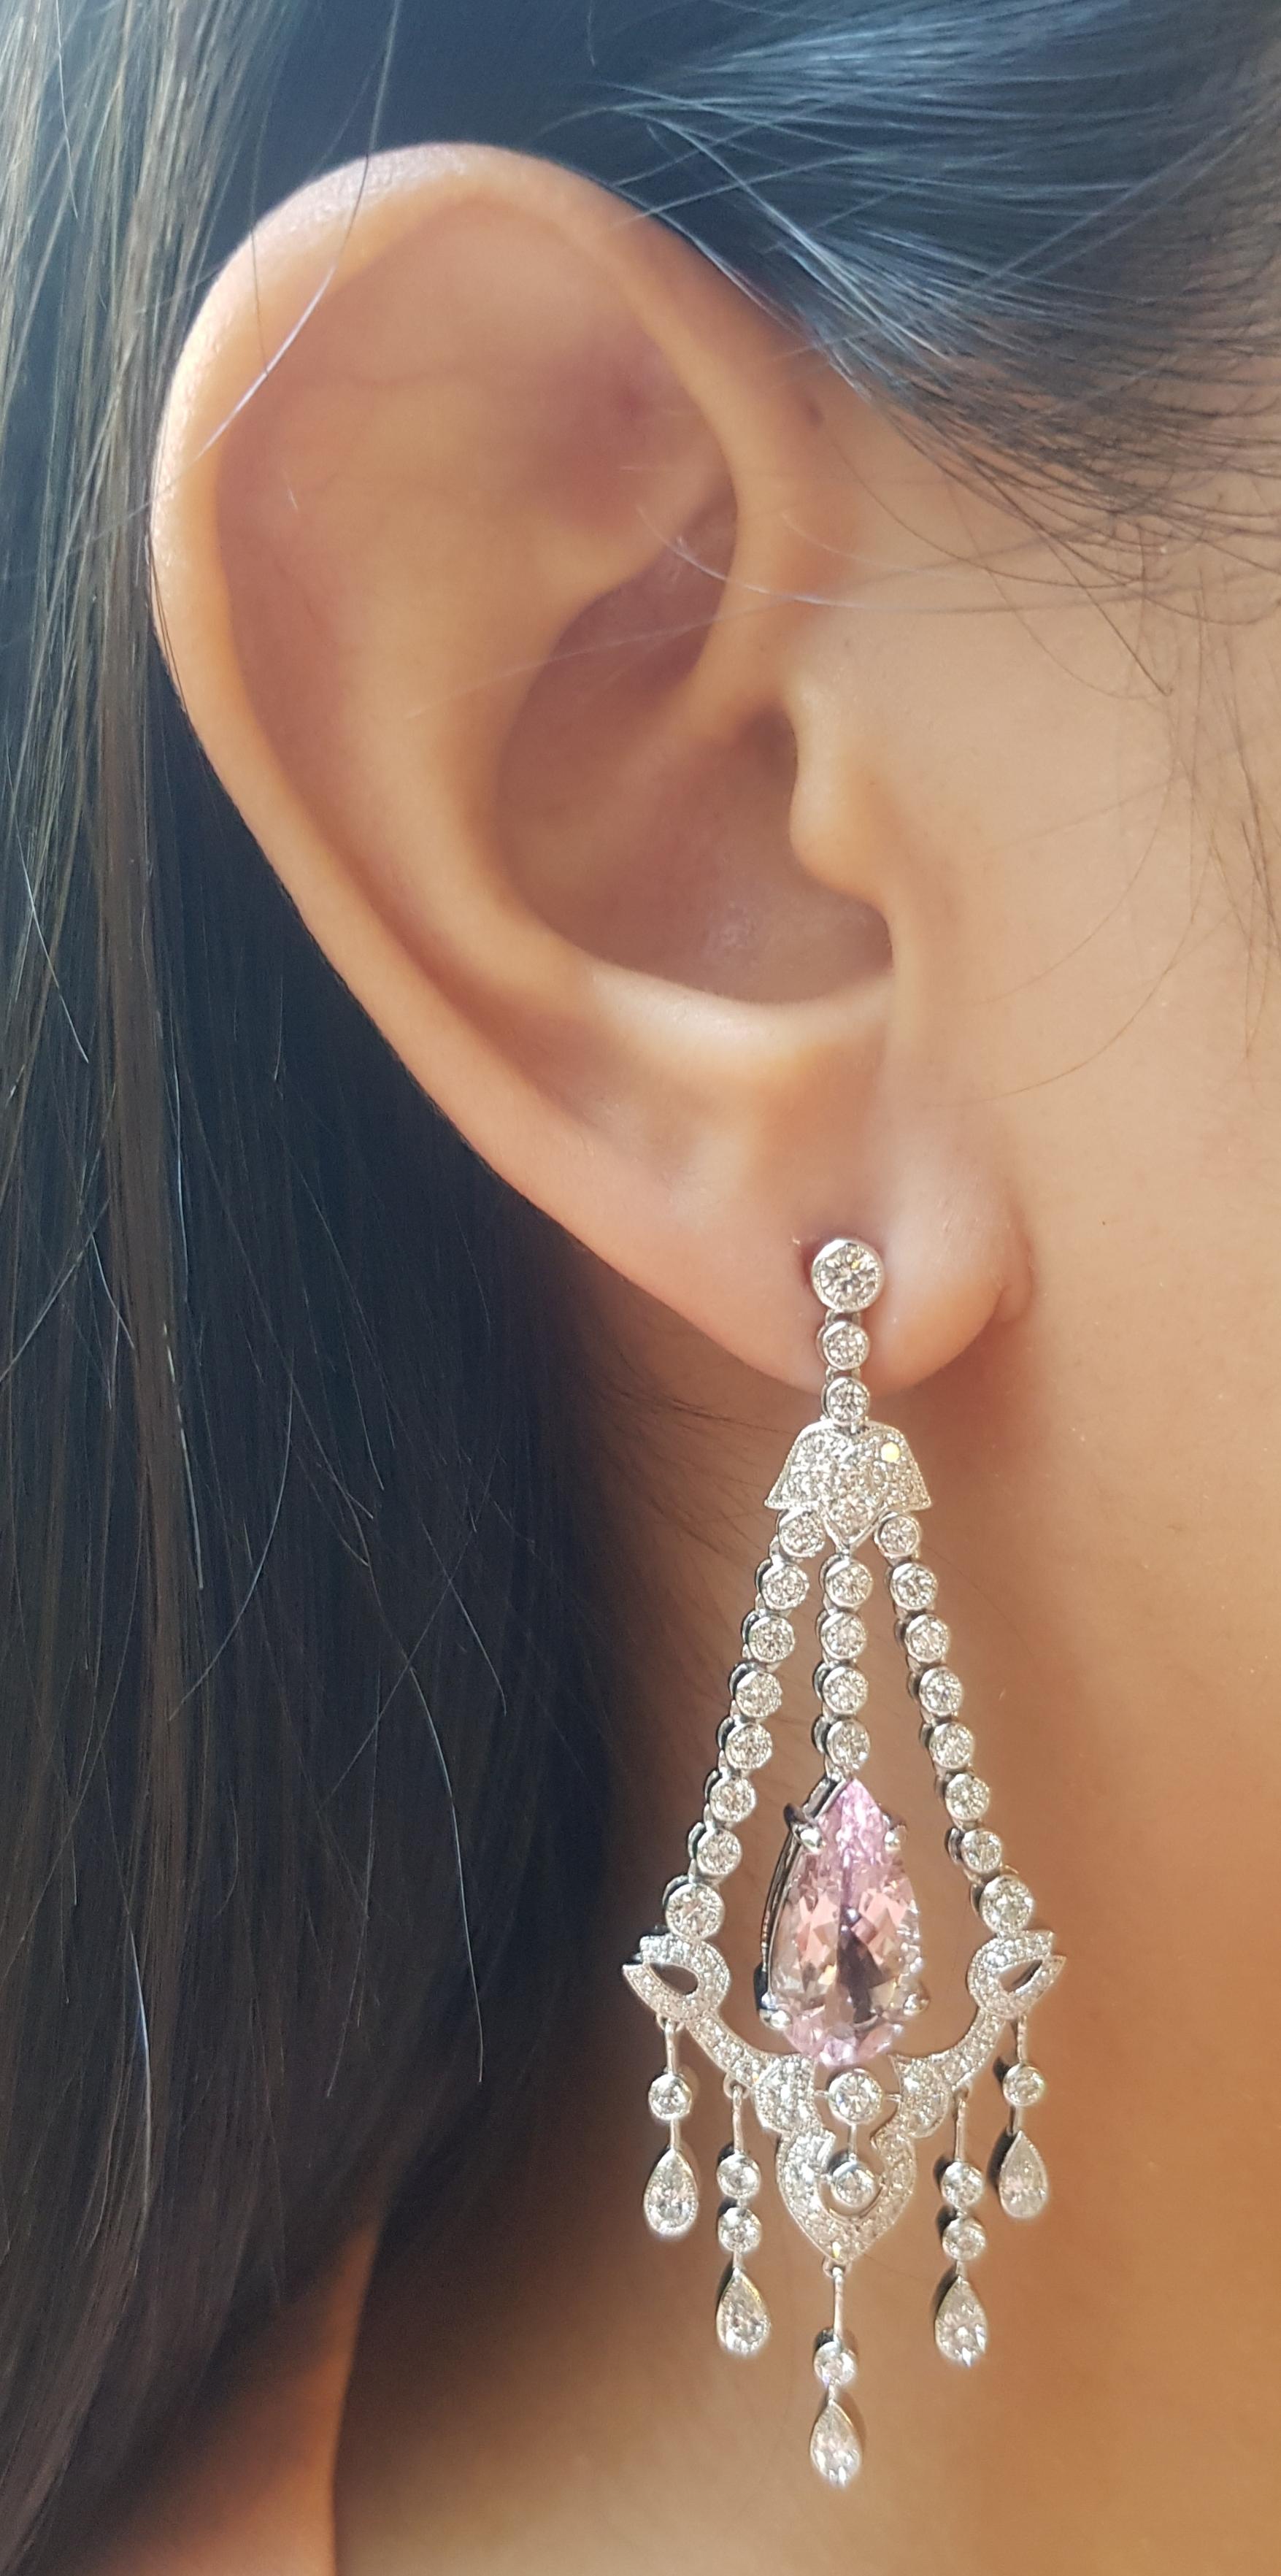 Morganite 7.25 carats with Diamond 3.70 carats Earrings set in 18K White Gold Settings

Width: 2.3 cm 
Length: 6.4 cm
Total Weight: 20.35 grams

